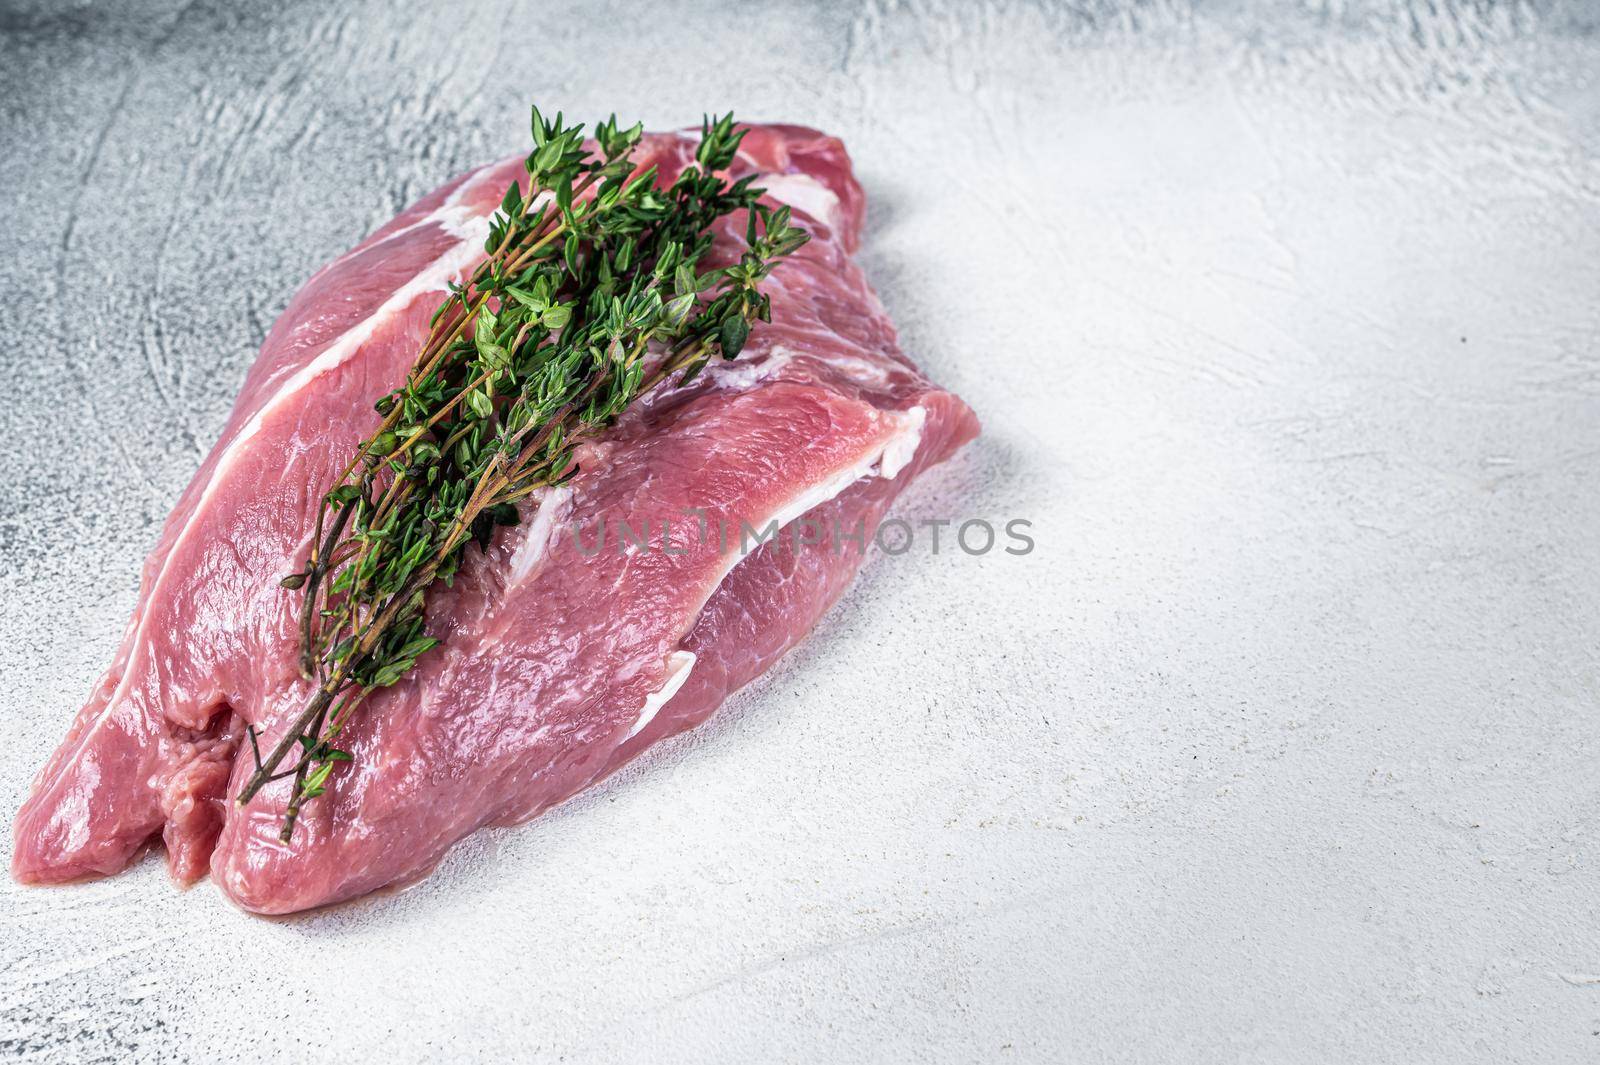 Raw pork shoulder meat on a butcher table. White background. Top view. Copy space.